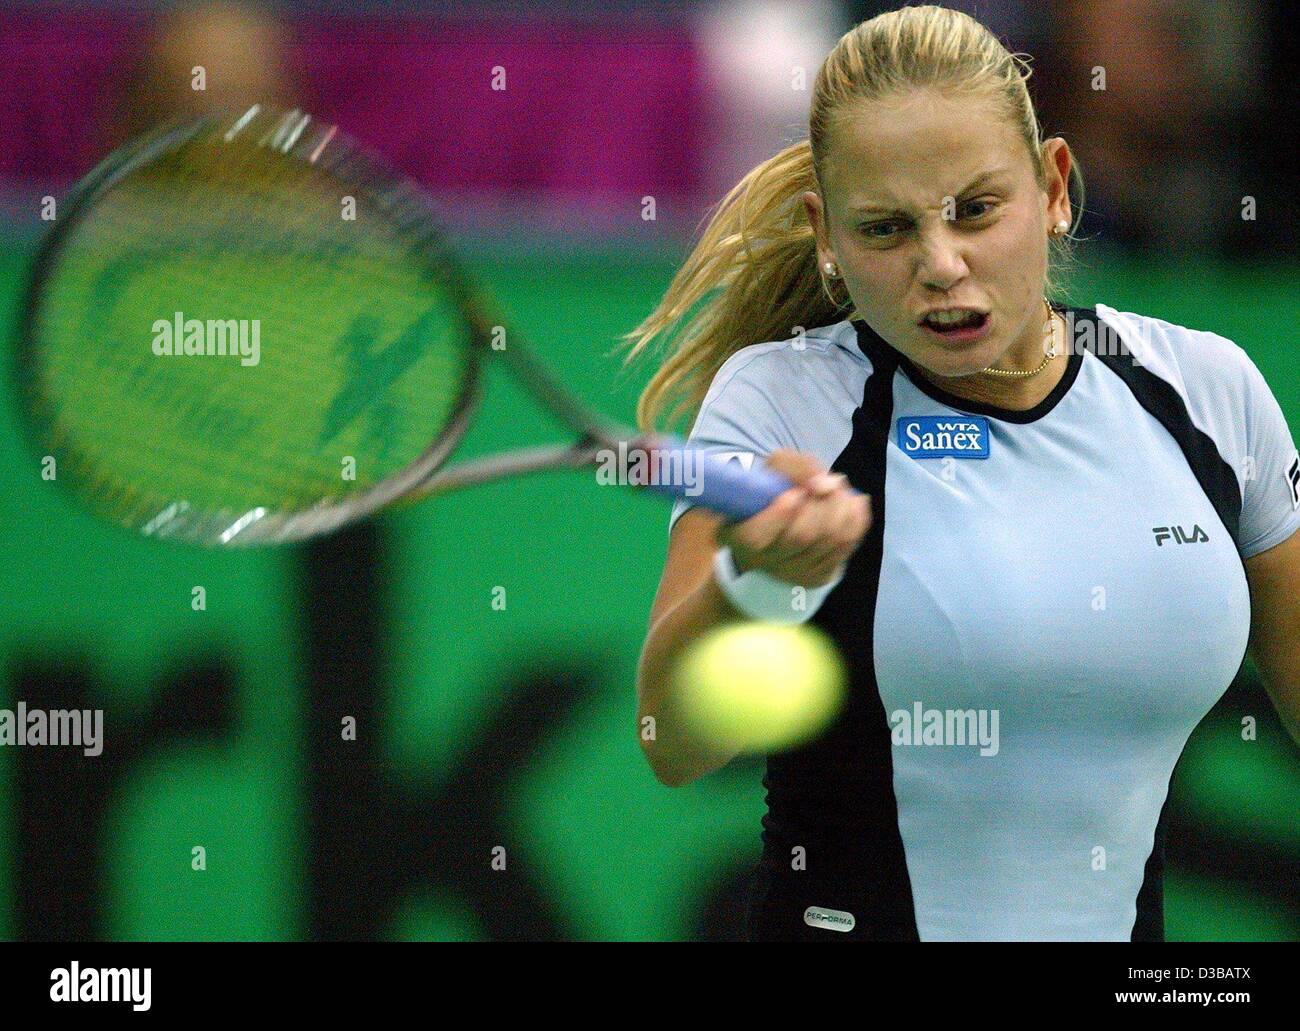 (dpa) - Yugoslavia's Jelena Dokic plays a forehand during a match of the 13th International Sparkassen Cup WTA Tournament in Leipzig, Germany, 25 September 2002. Stock Photo